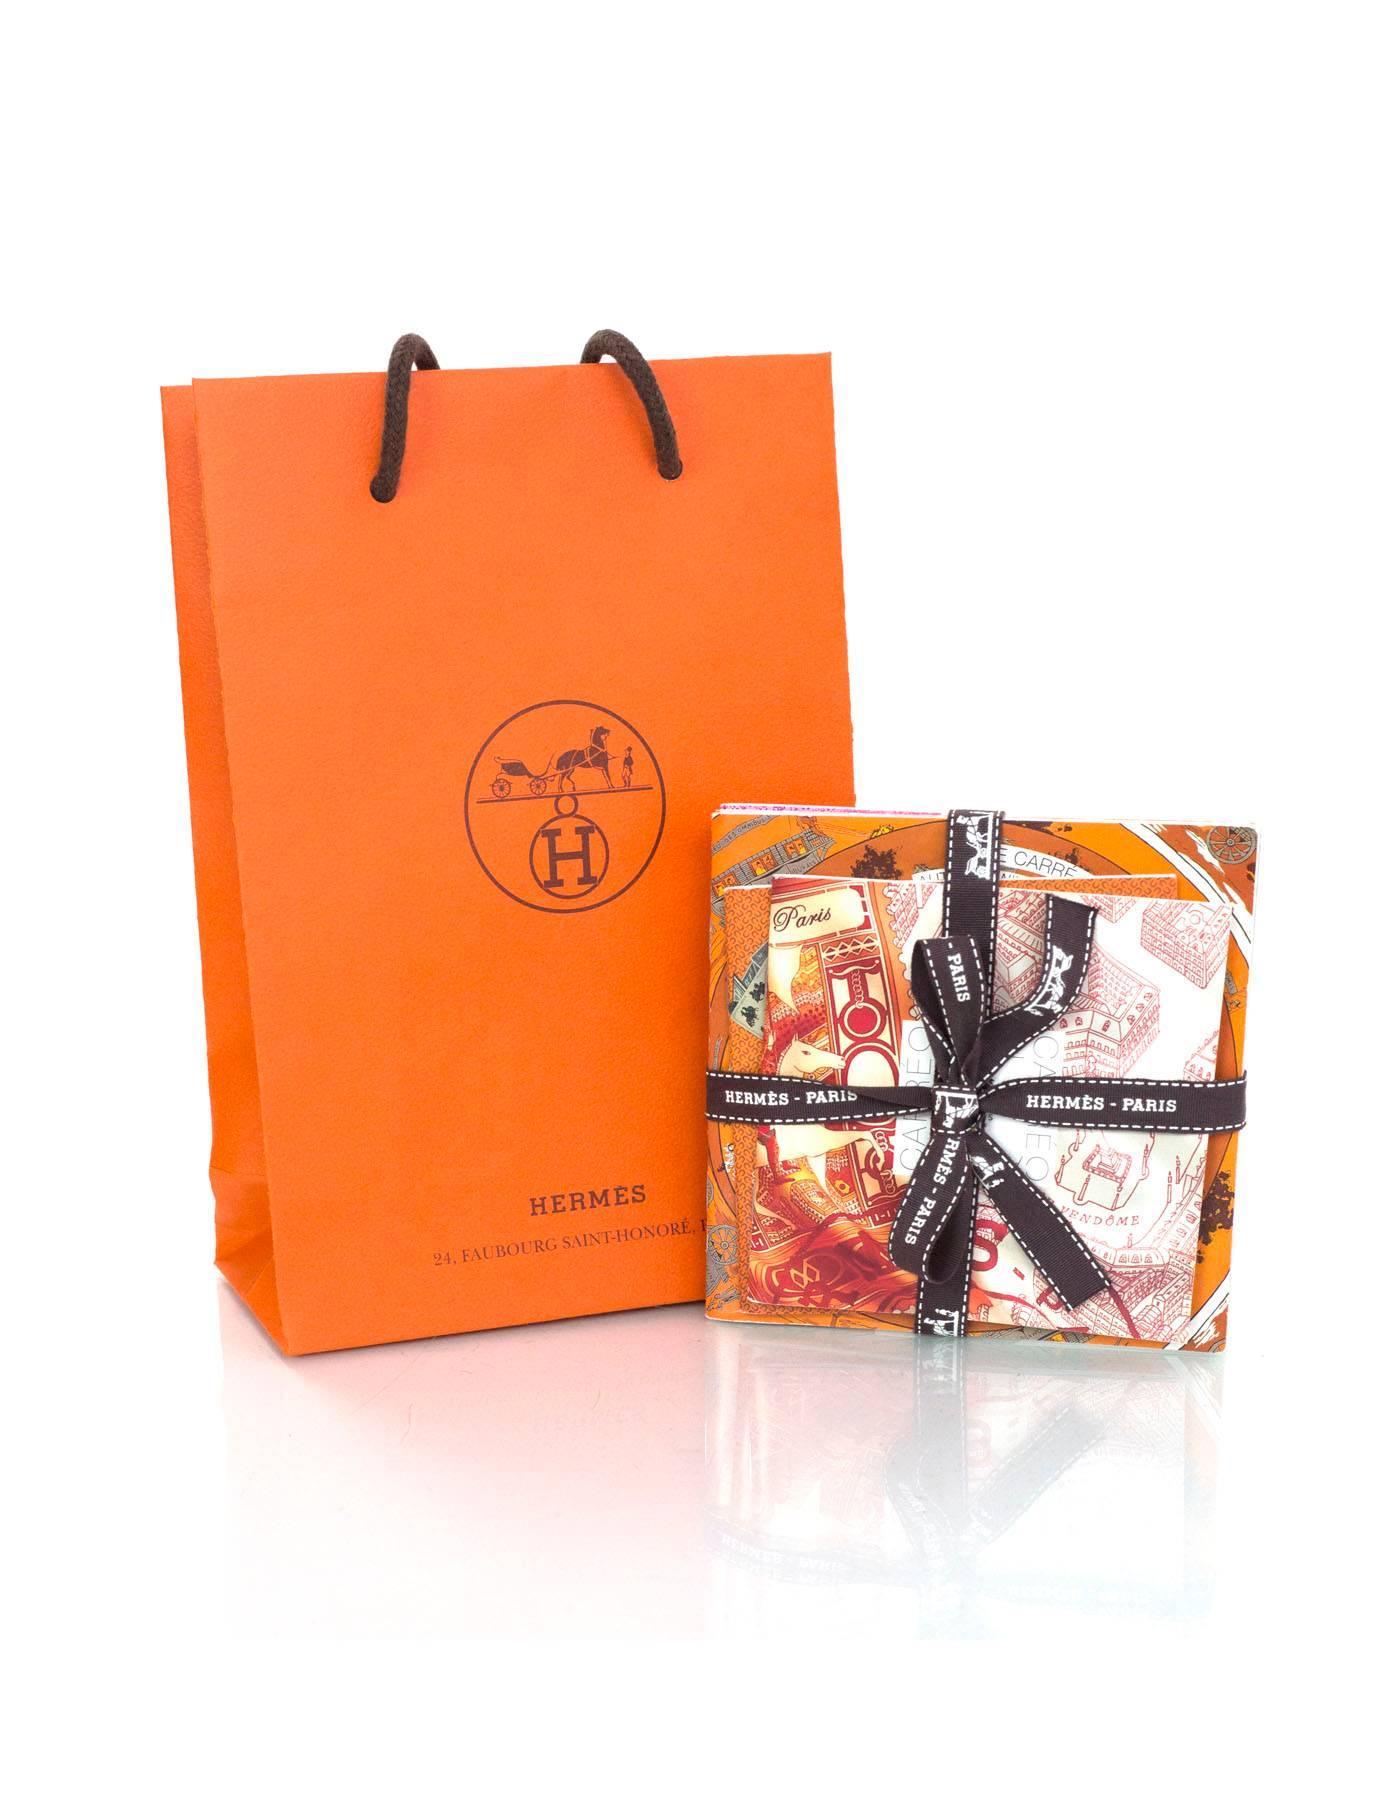 Set of five Hermes illustrated booklets featuring ways to tie Hermes scarves, prints and names. From Spring/Fall '06, Spring/Fall '07, Spring '08. Shopping bag included.

 
Condition: Excellent pre-owned condition

Measurements:
Booklets: 5"W x